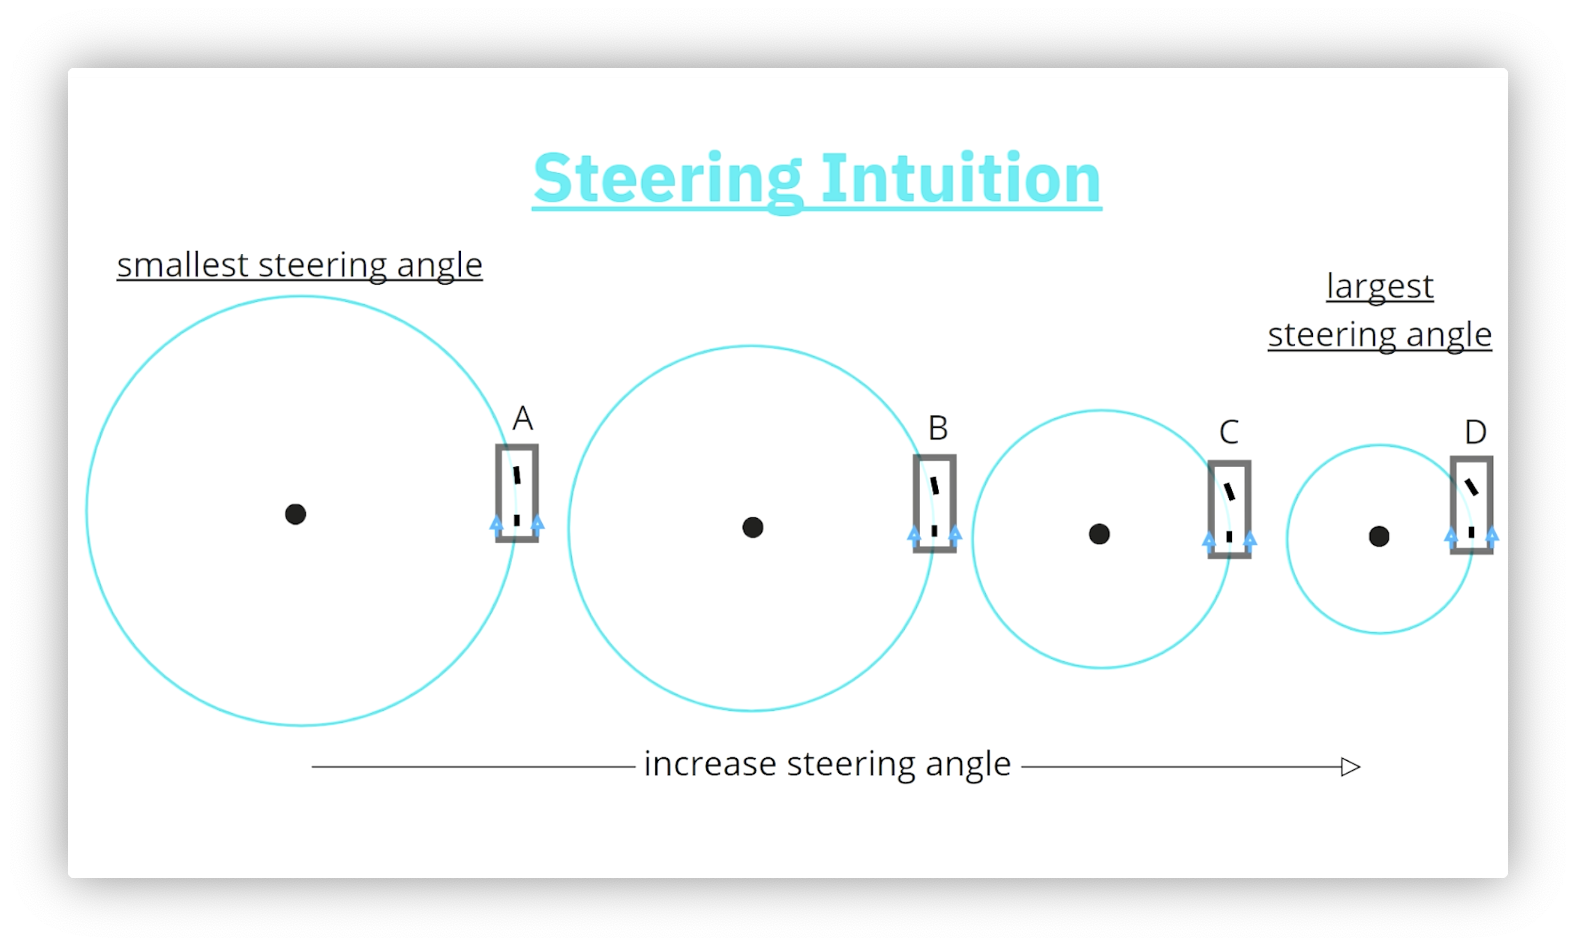 Four diagrams arranged from smallest to largest steering angle illustrating the inverse relationship between steering angle and radius.